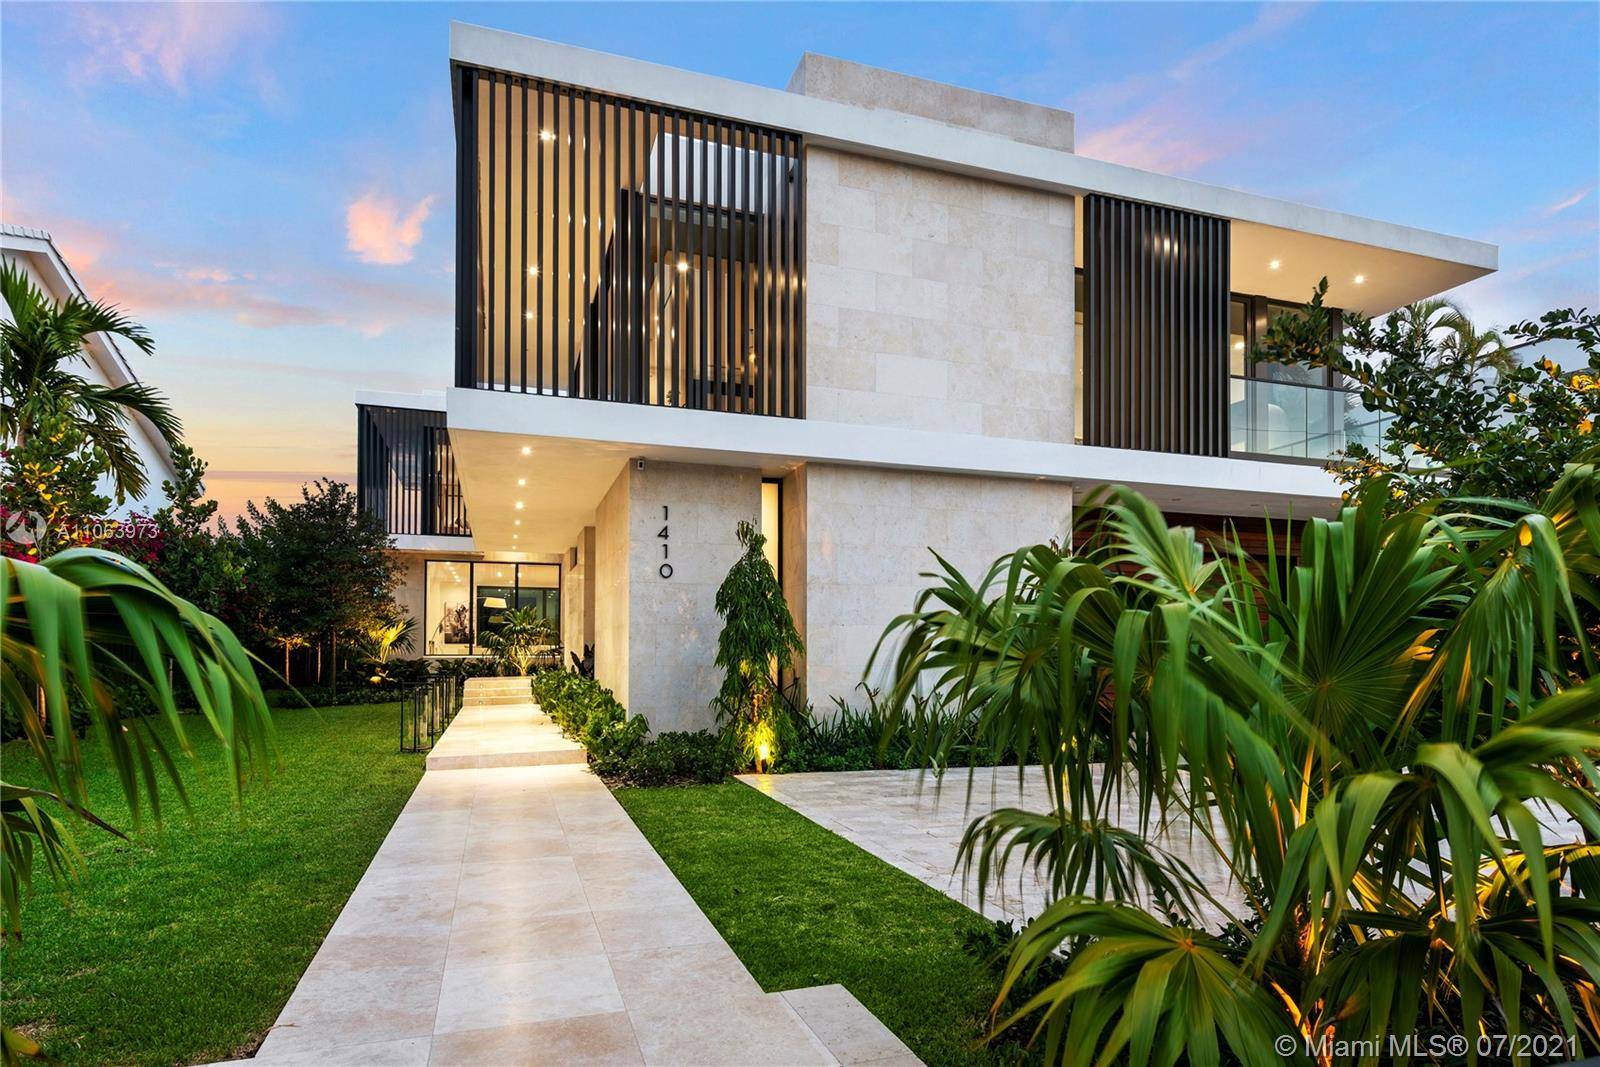 Villa Nova, a modern masterpiece, offers South, East, and West exposure.